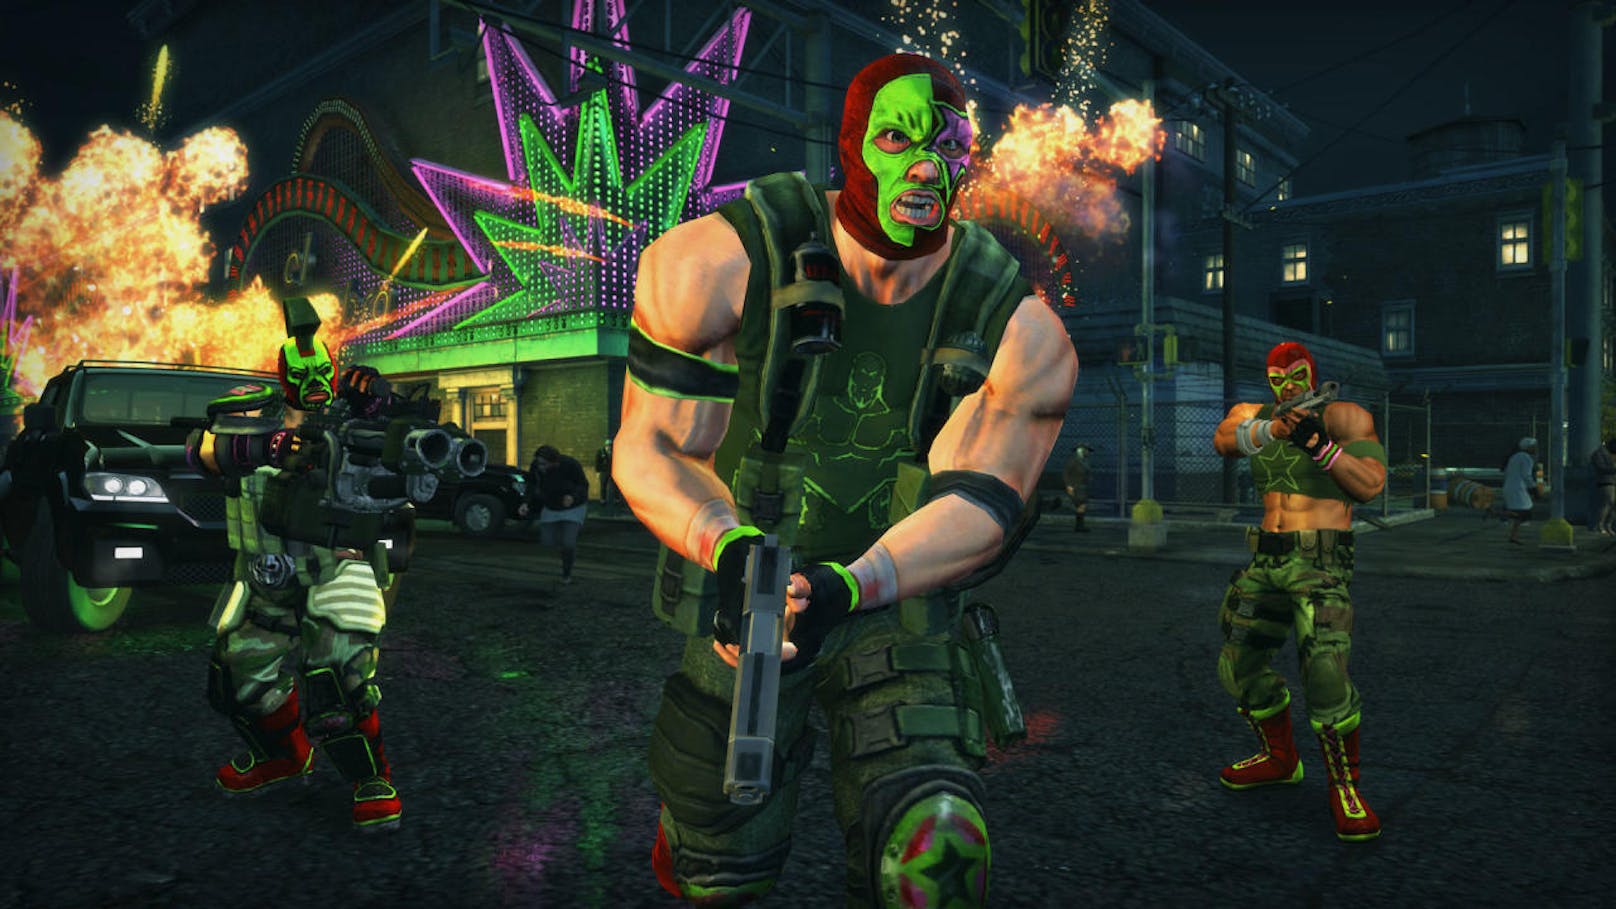  <a href="https://www.heute.at/digital/games/story/Saints-Row--The-Third-als-Switch-Spektakel-52093154" target="_blank">Saints Row: The Third - The Full Package</a>